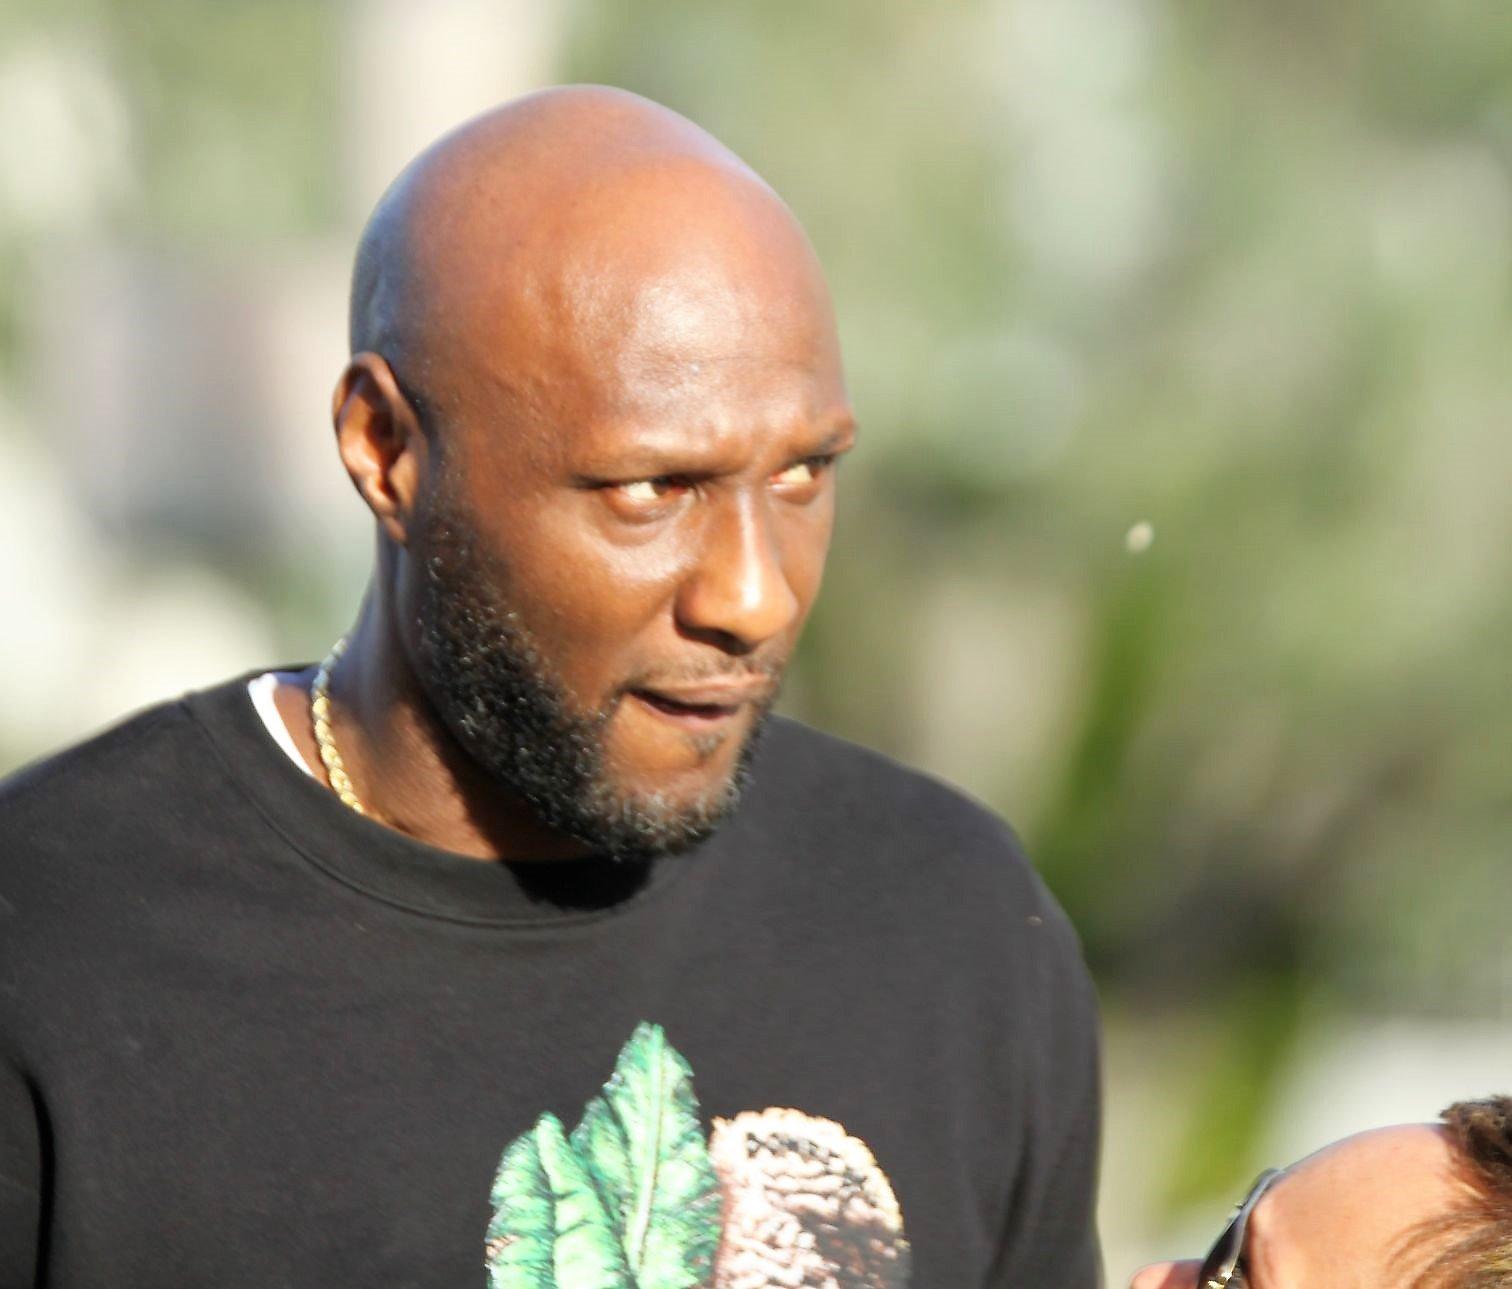 Lamar Odom and Sabrina Parr Appear To Have An Emotional Moment Before Leaving In Car